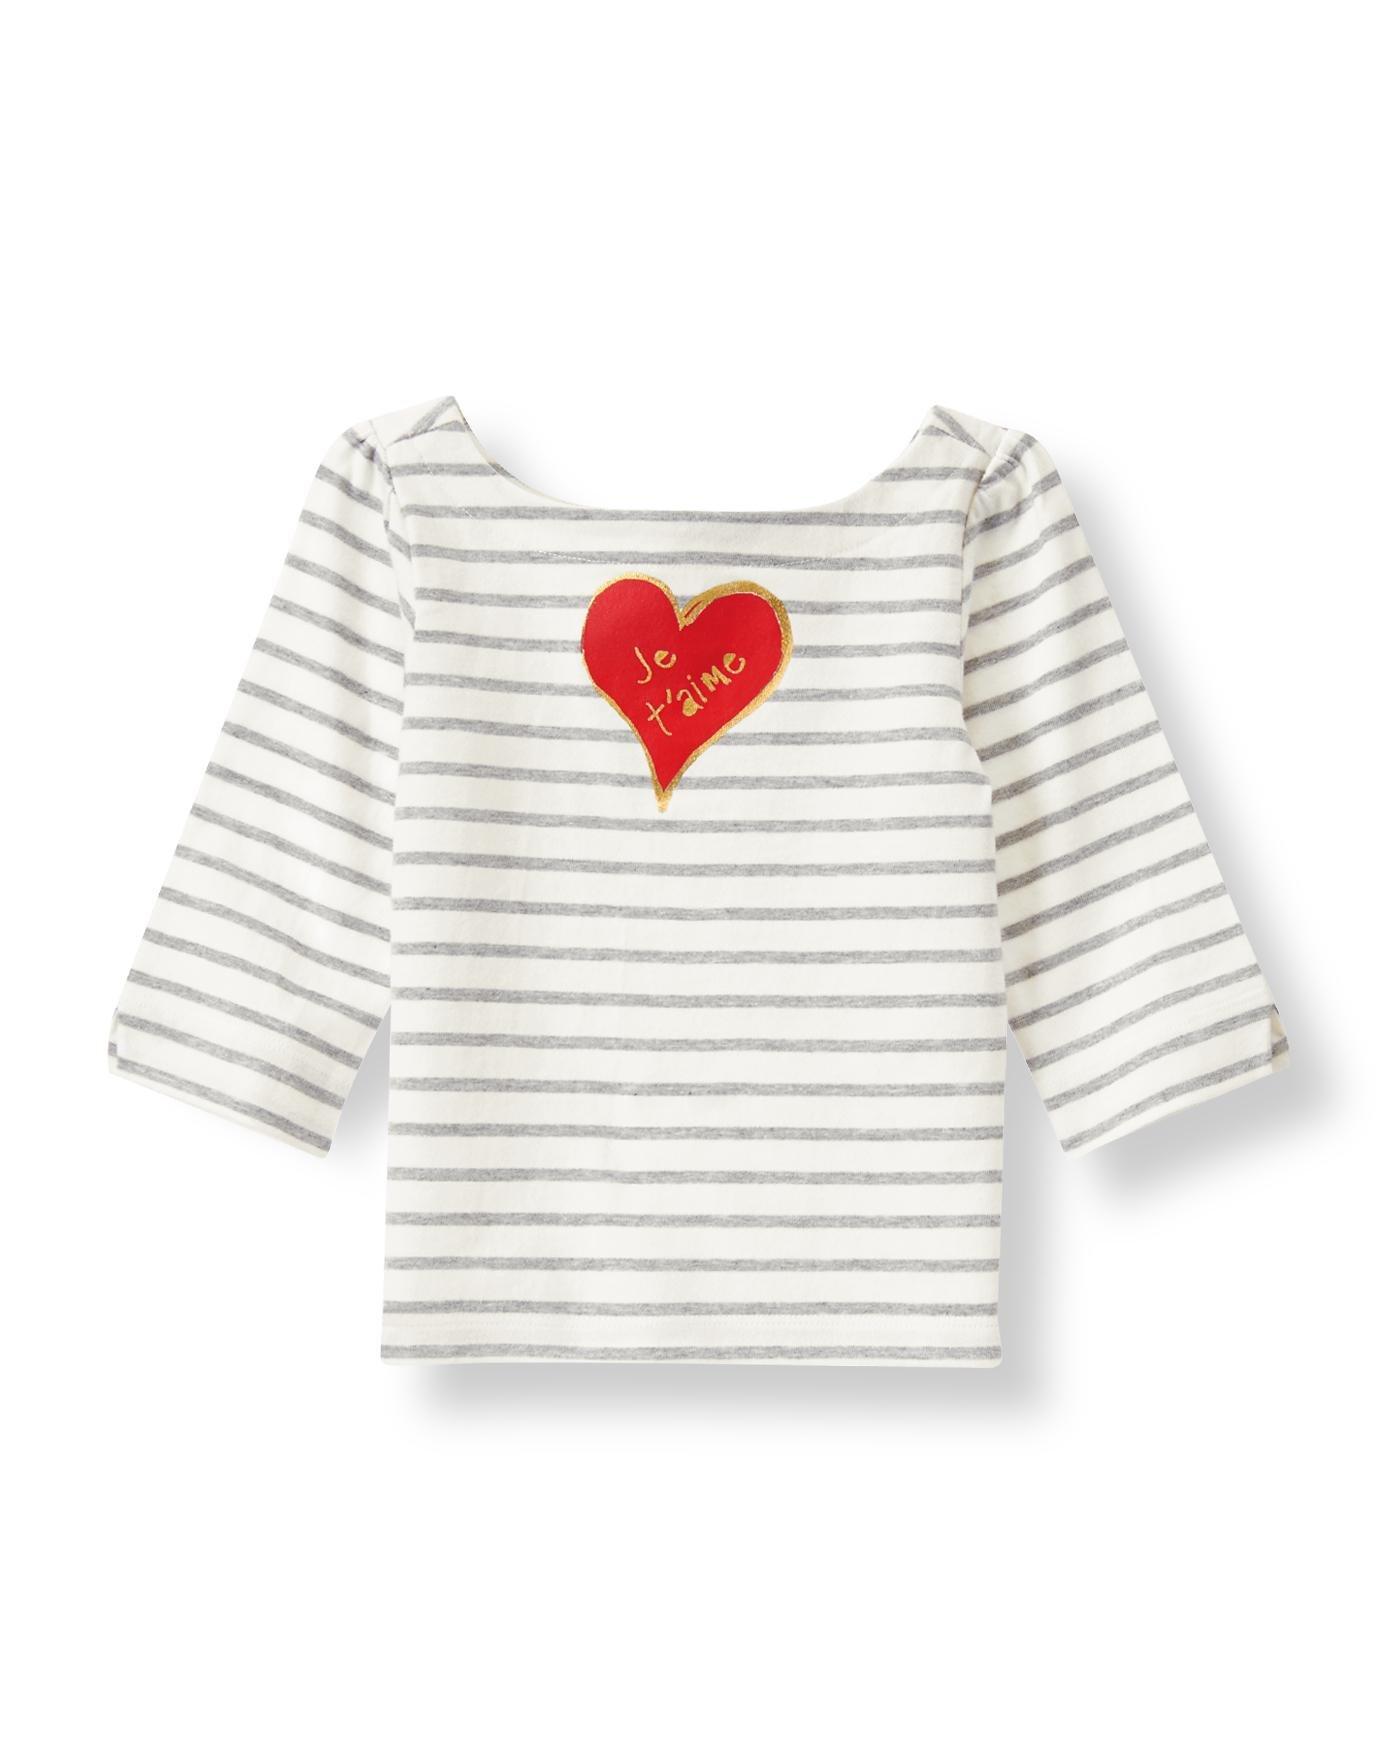 Je t'aime Heart Striped Tee image number 0